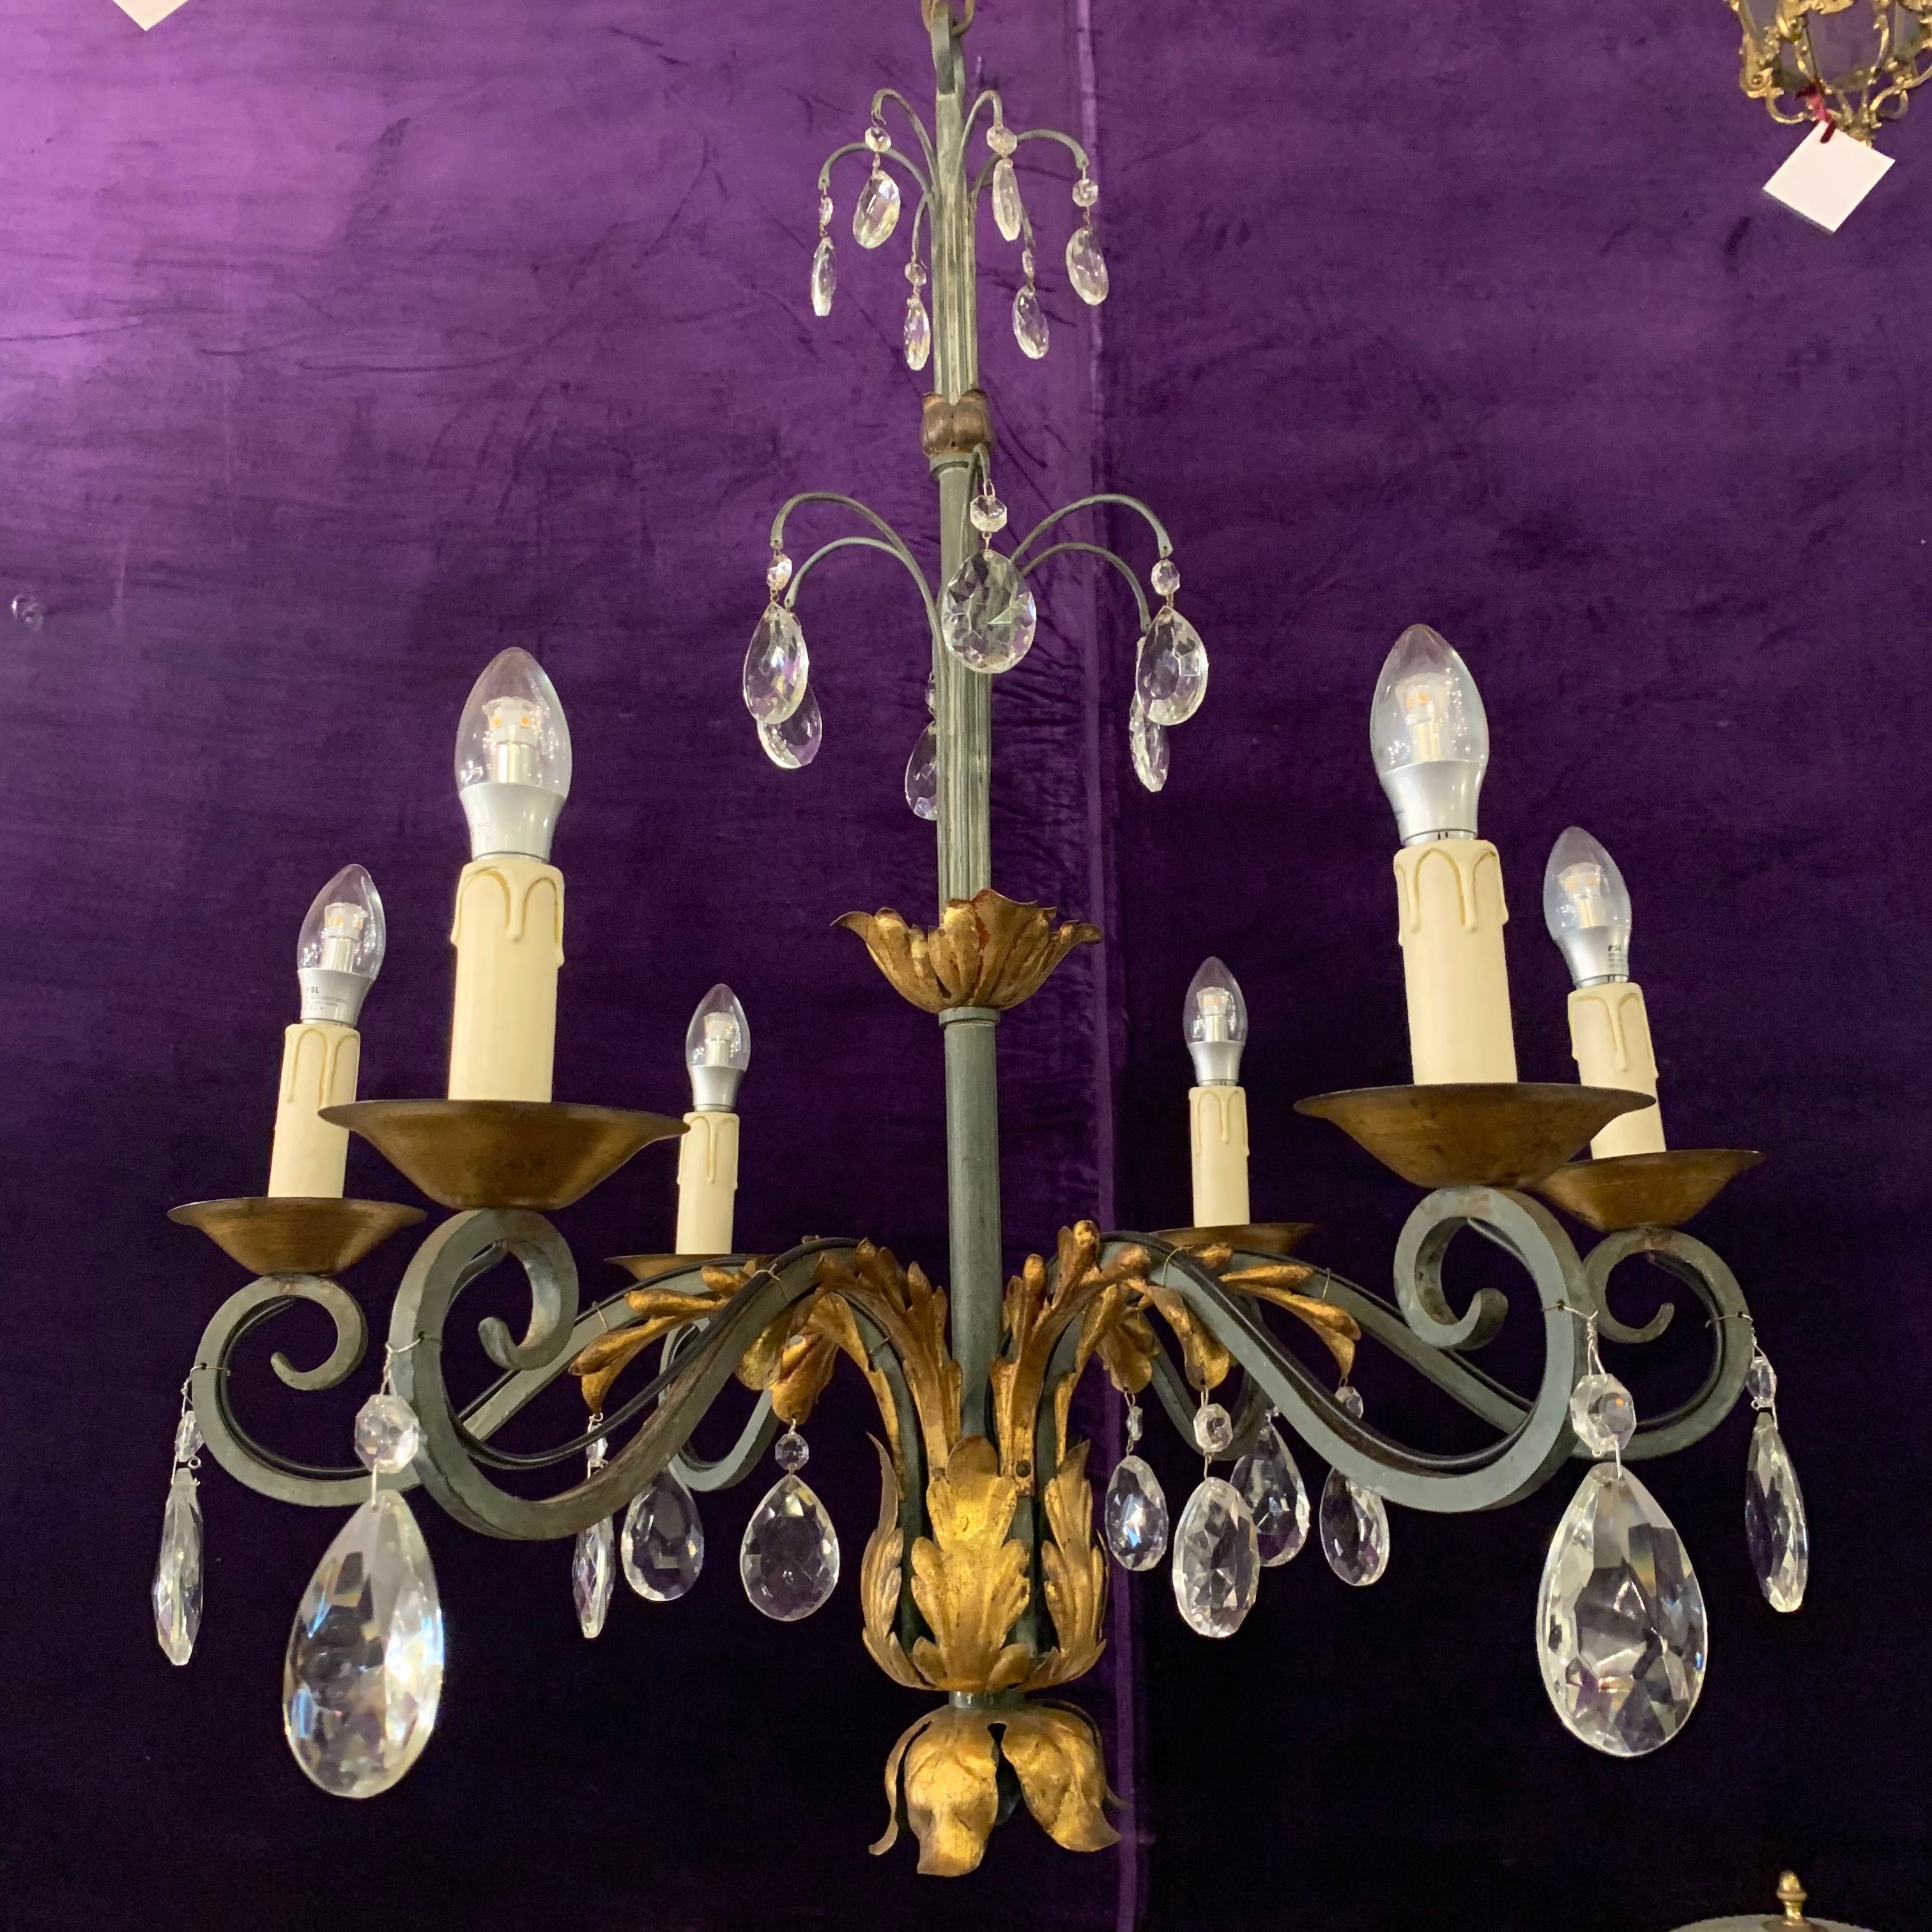 Wrought Iron Chandelier with Gold Leaf Details